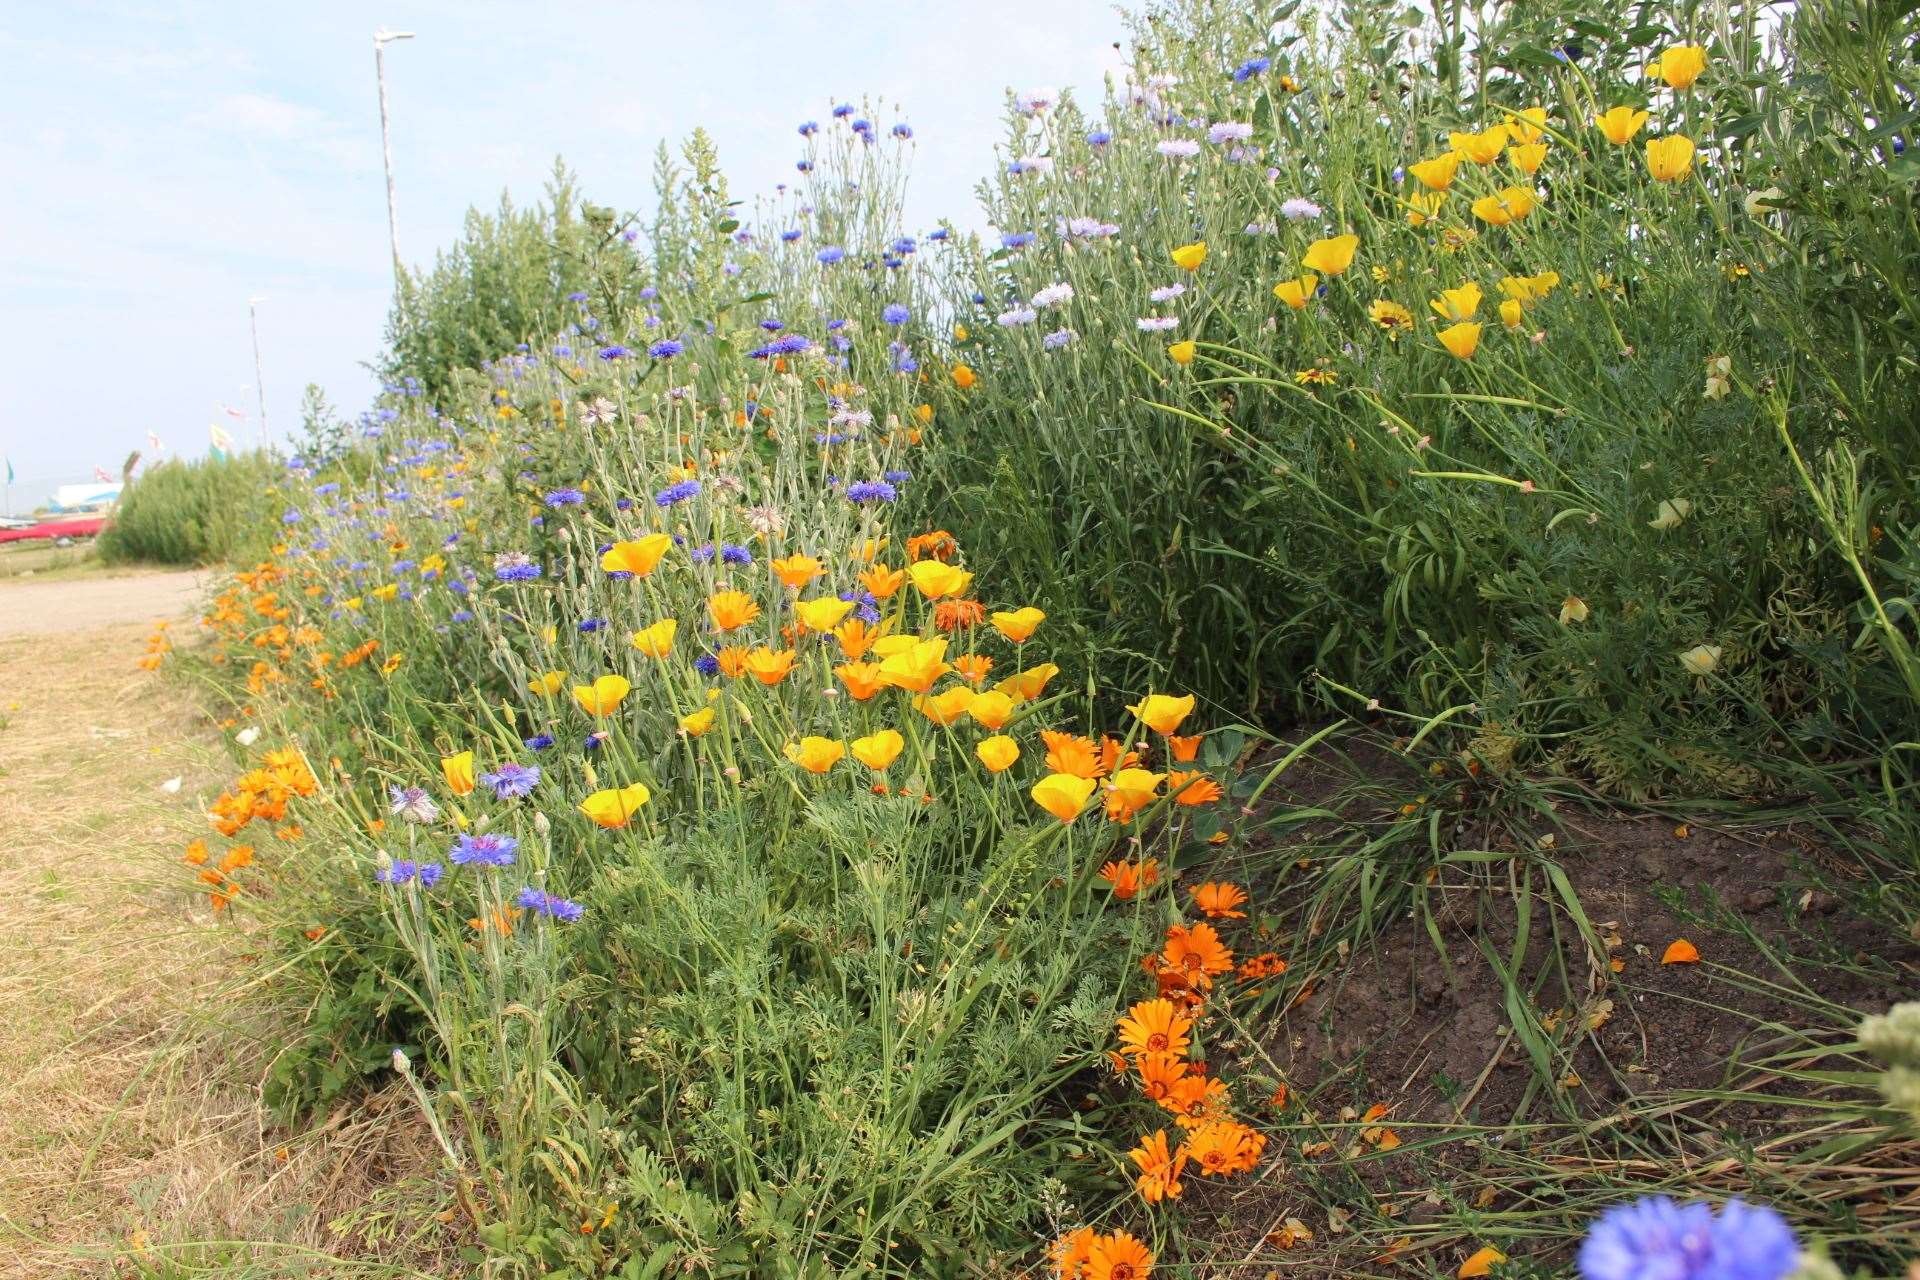 Bee-friendly flowers have been planted along the coast road at Minster on the Isle of Sheppey (14119470)